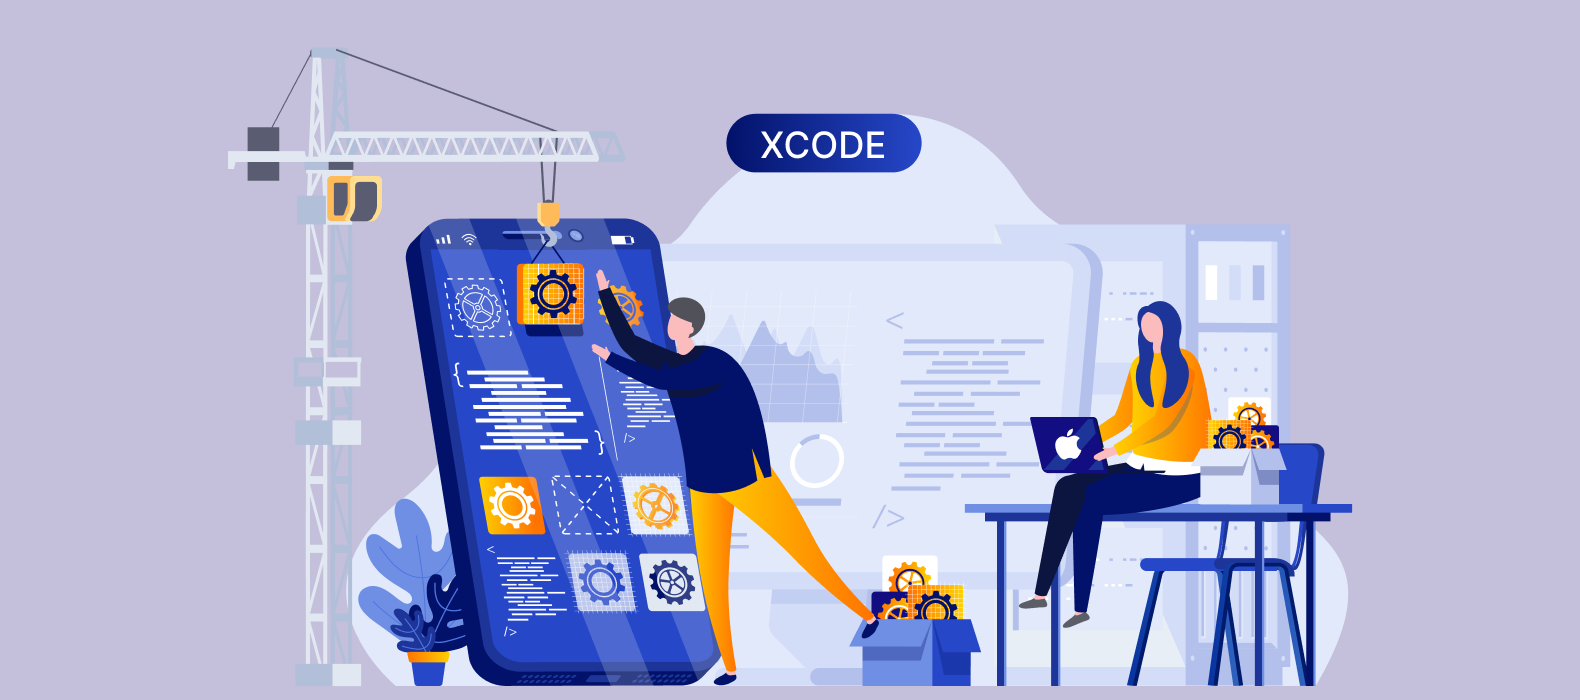 Why Choose Xcode for iOS Development